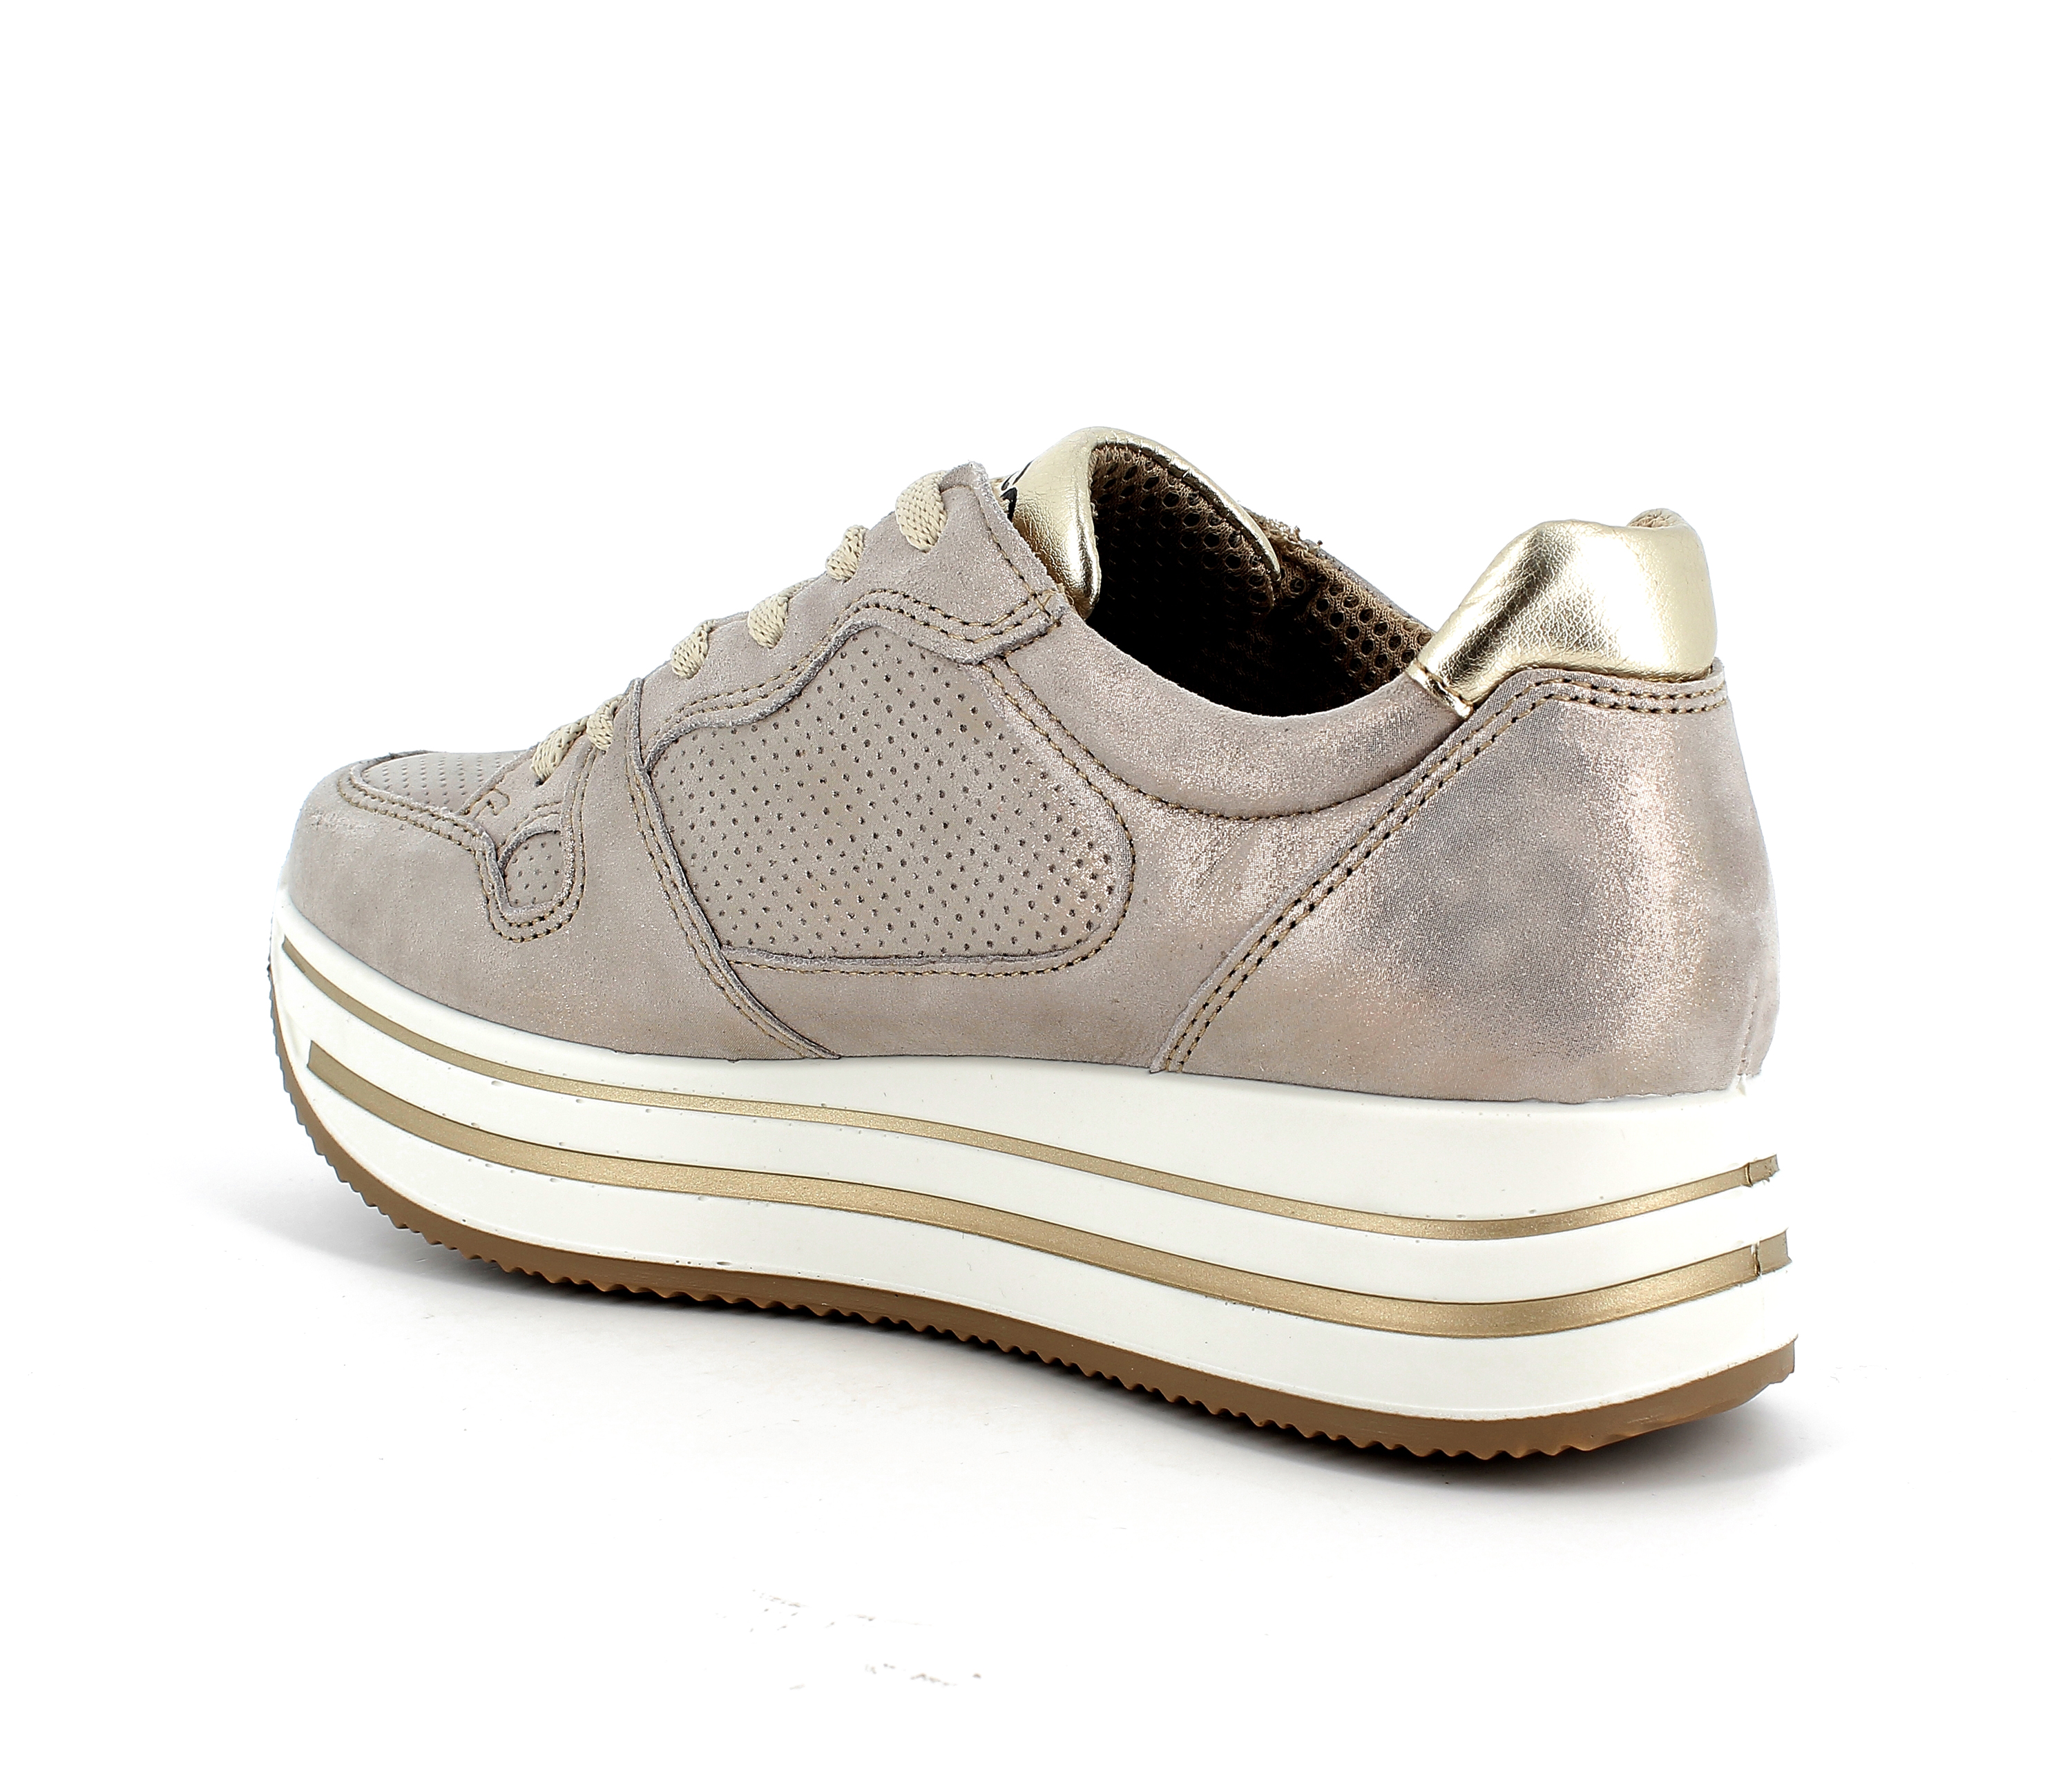 Dky 71521 - Taupe Leather